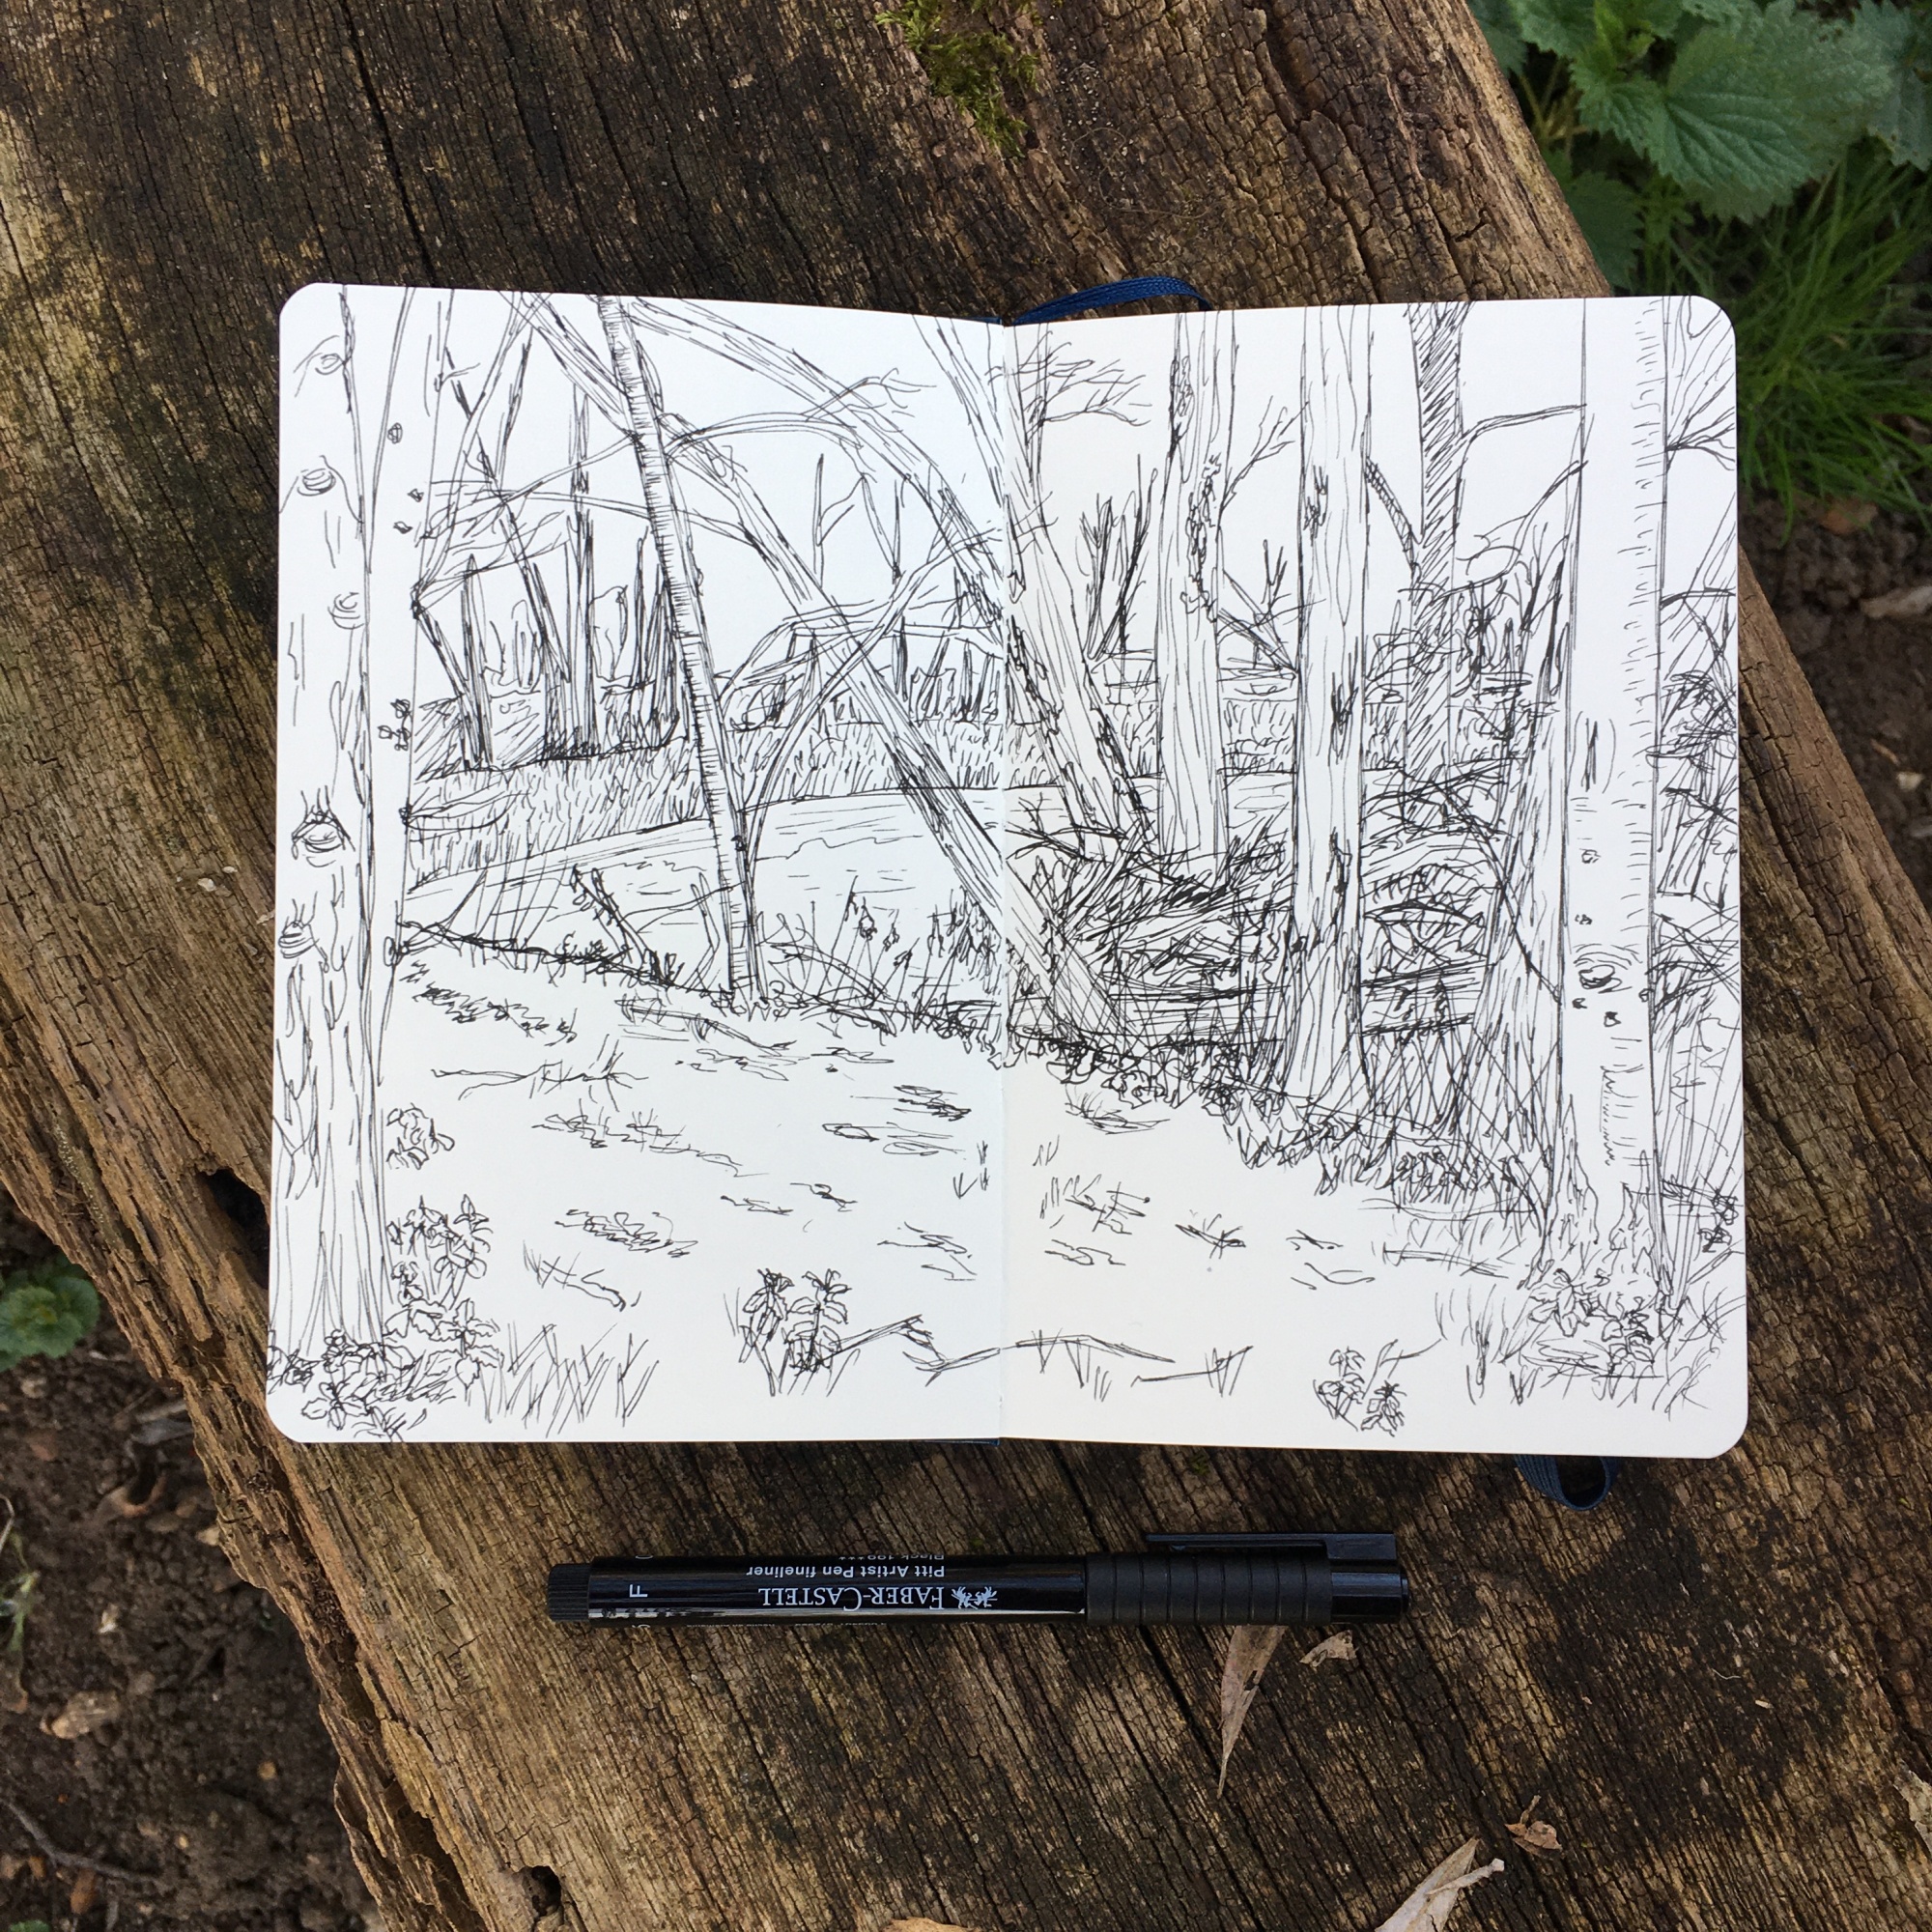 Image shows an open sketchbook lying on a rough wooden bench. On the pages of the sketchbook is a rough pen sketch of trees surrounding water and marshland.